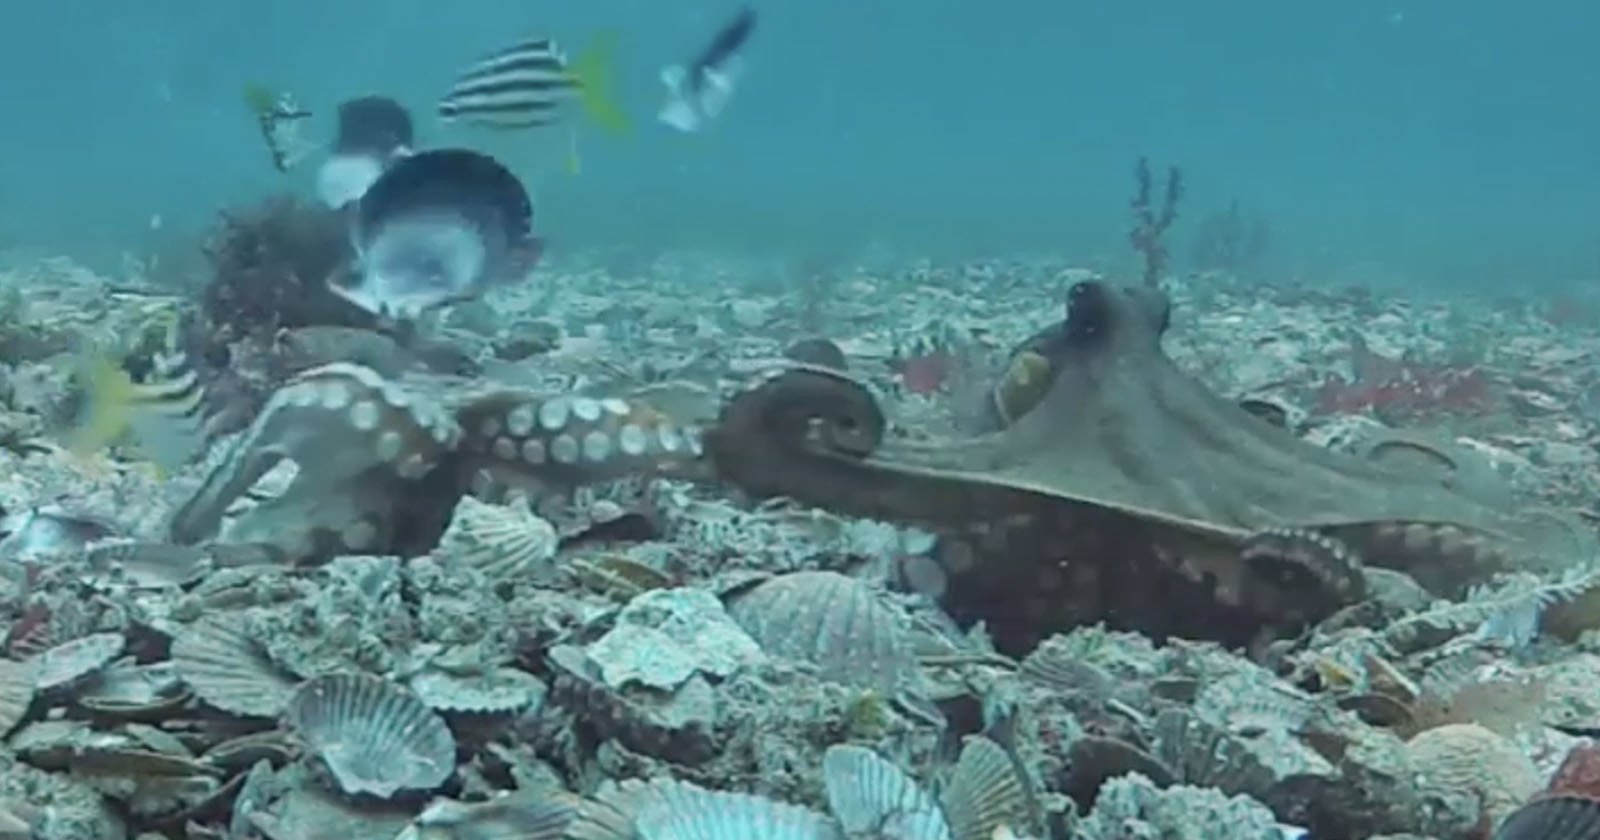  underwater cameras capture octopuses hurling shells each other 